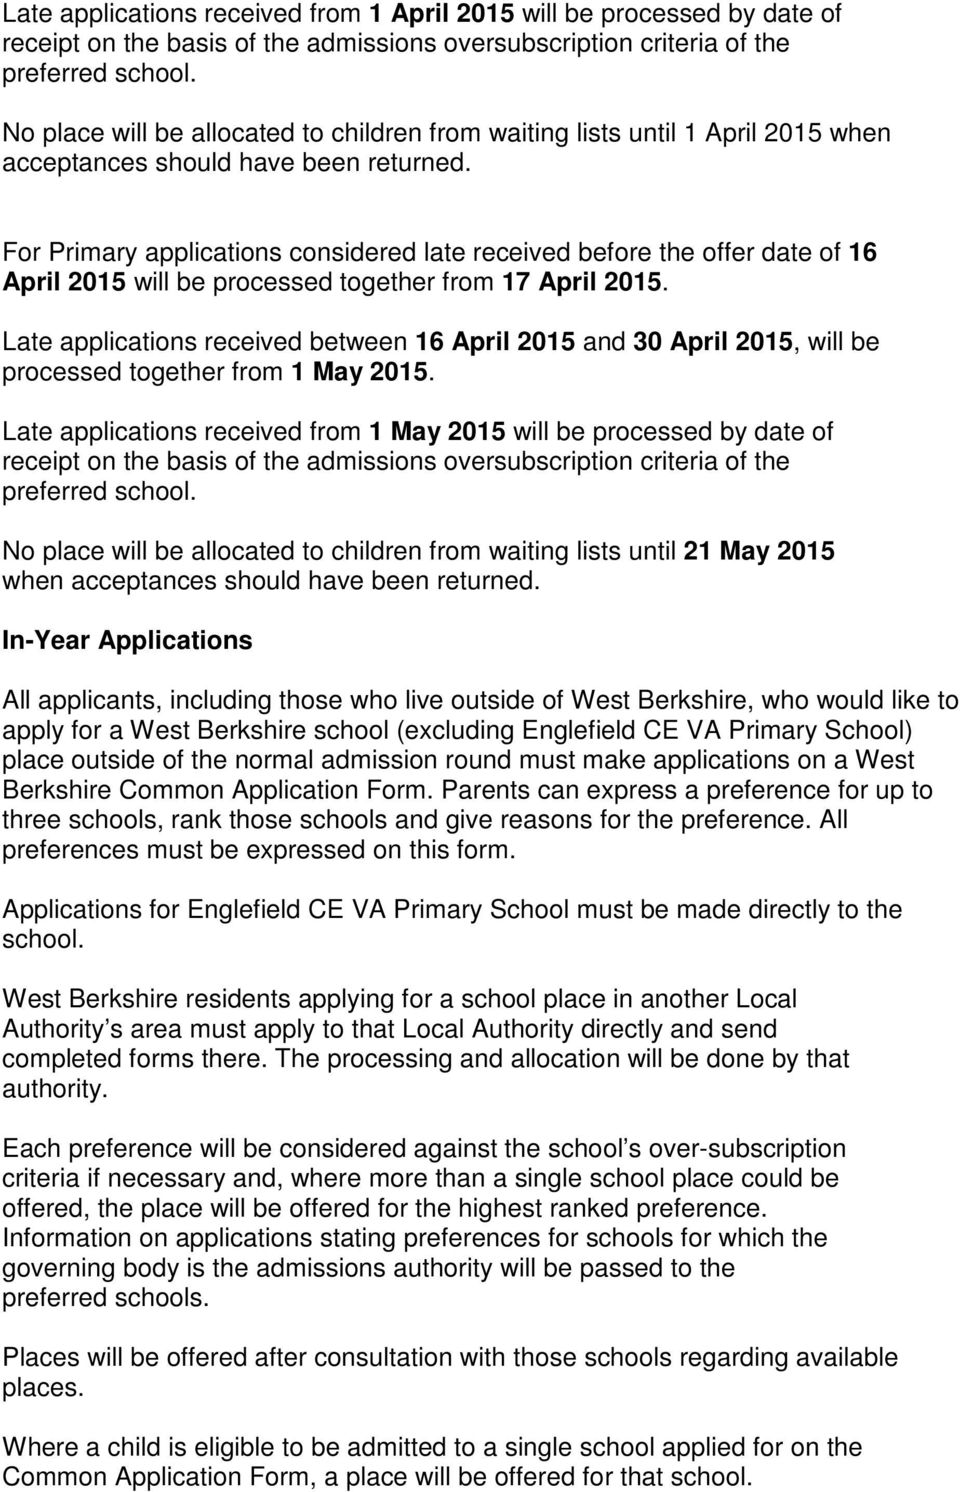 For Primary applications considered late received before the offer date of 16 April 2015 will be processed together from 17 April 2015.